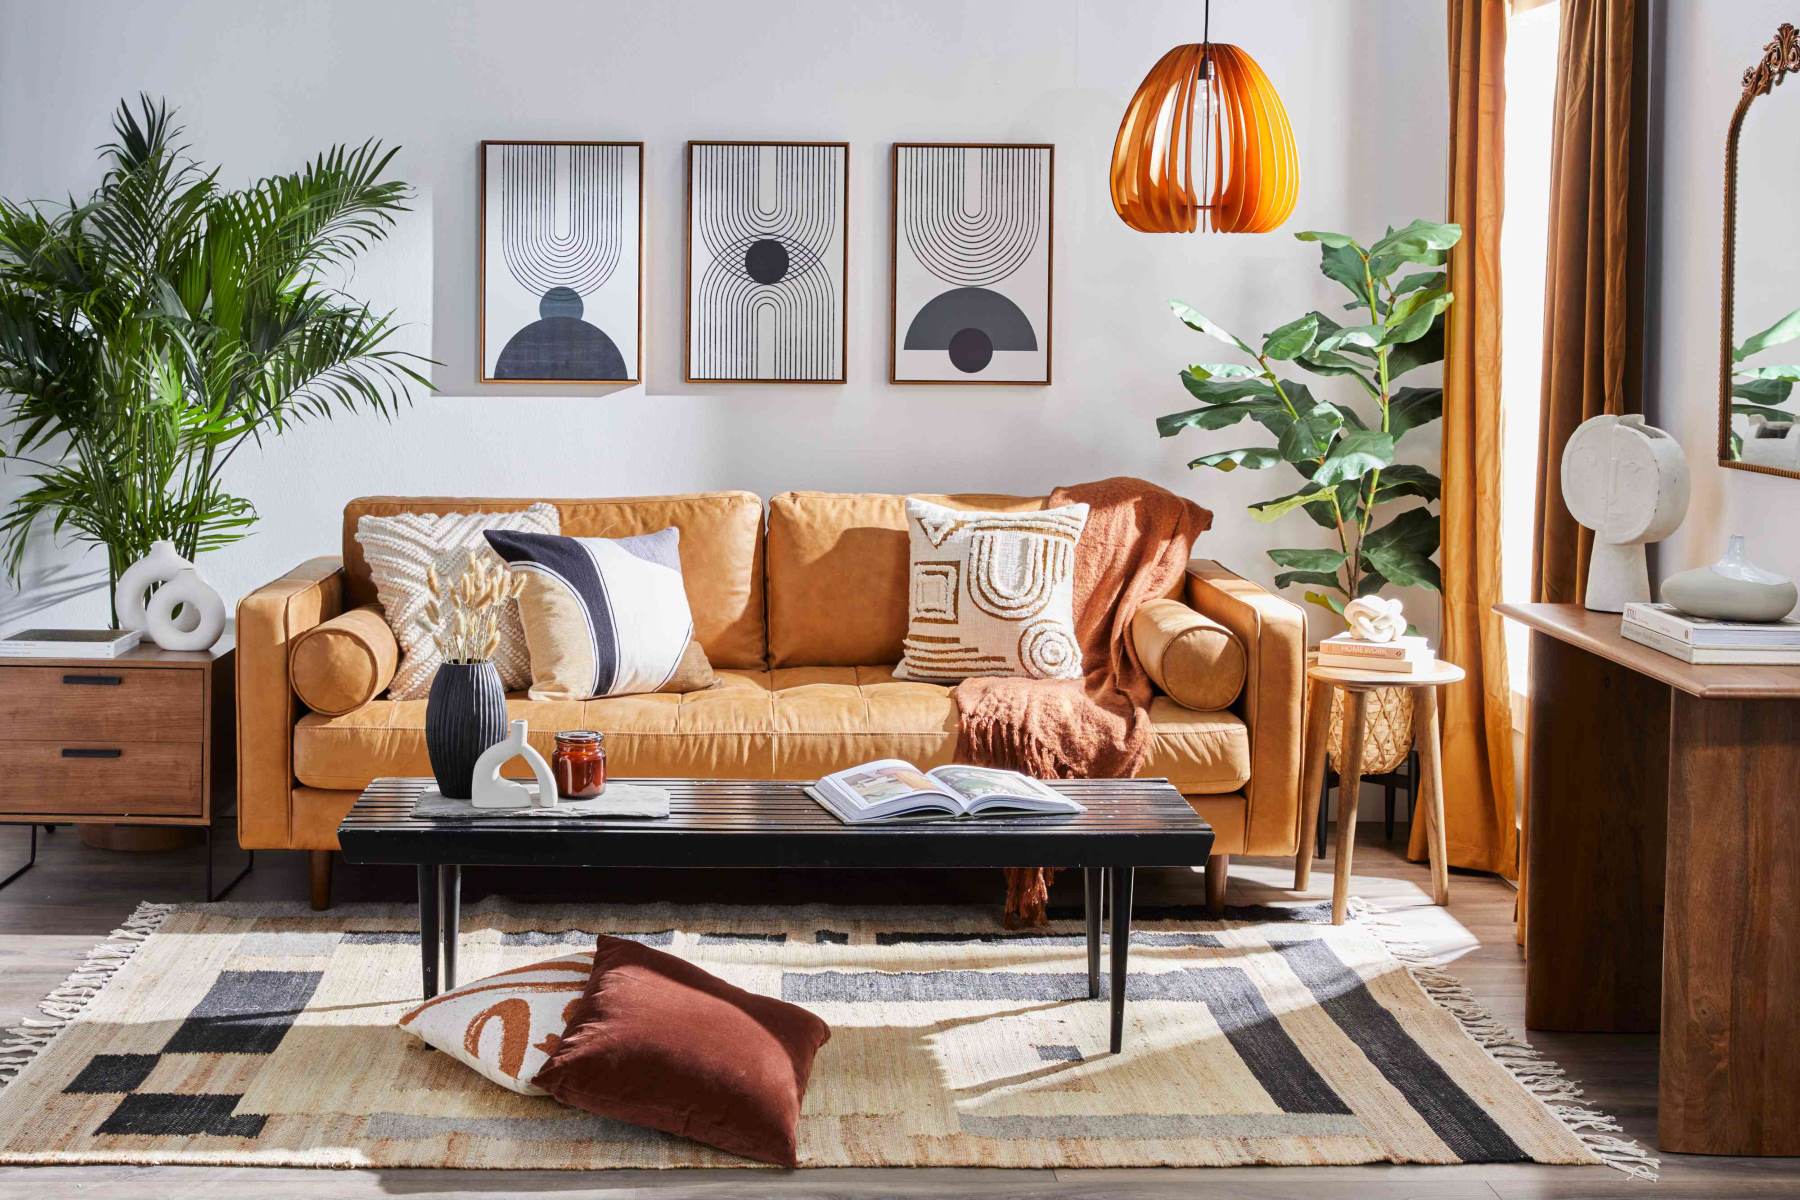 How To Decorate A Living Room